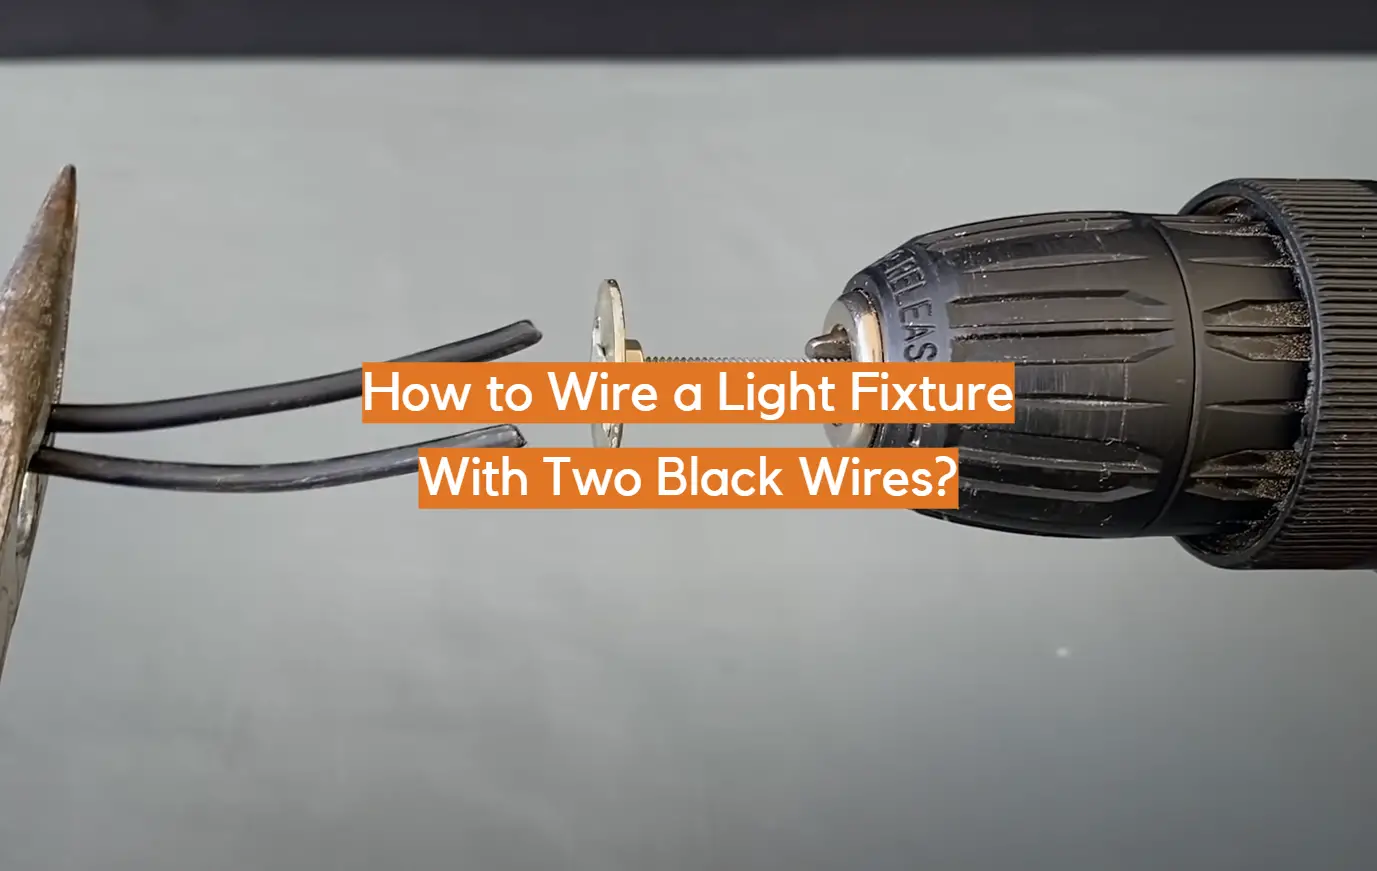 How to Wire a Light Fixture With Two Black Wires?